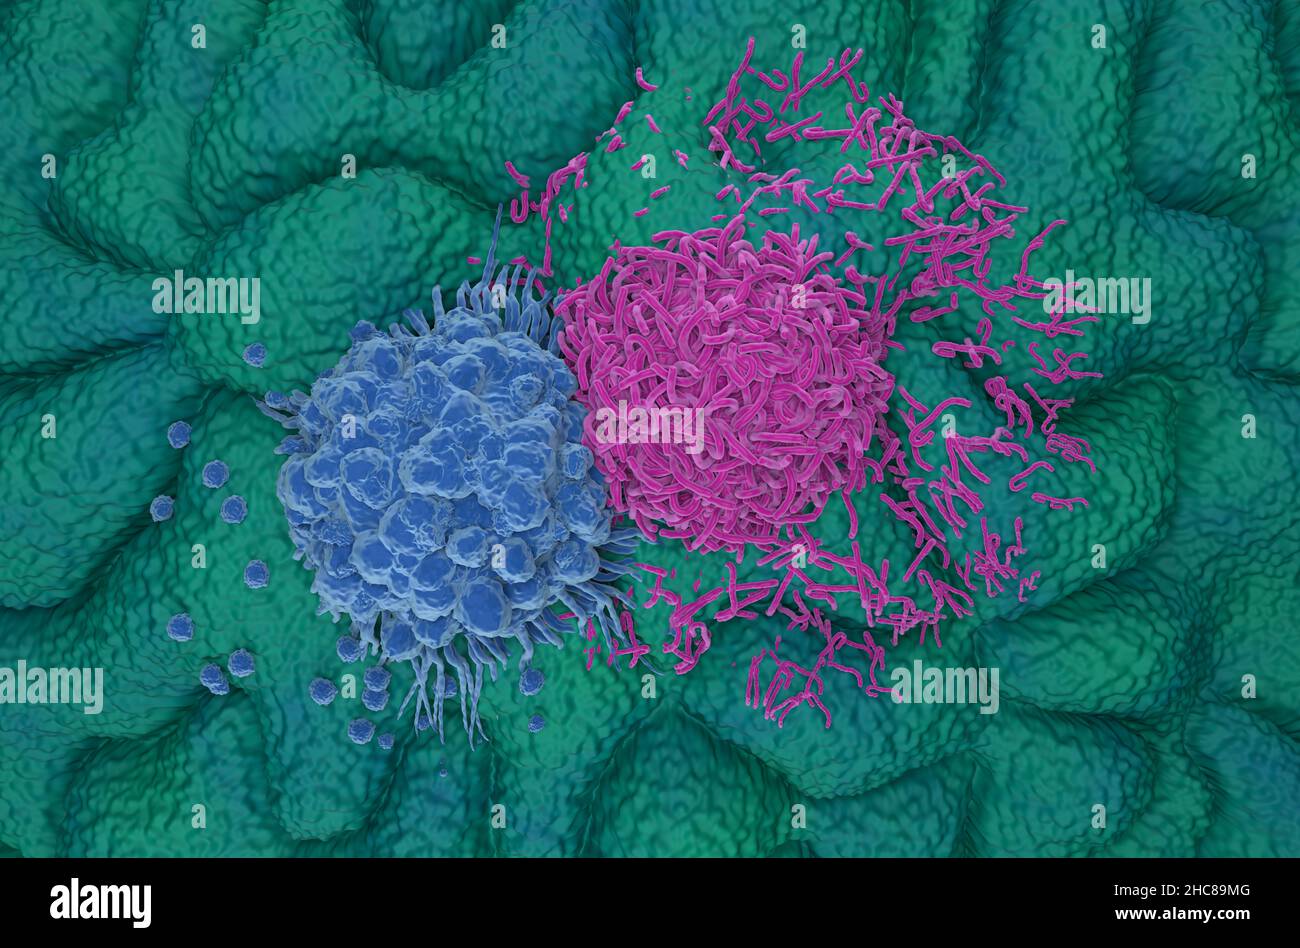 Gastric stomach cancer cells top view 3d illustration Stock Photo